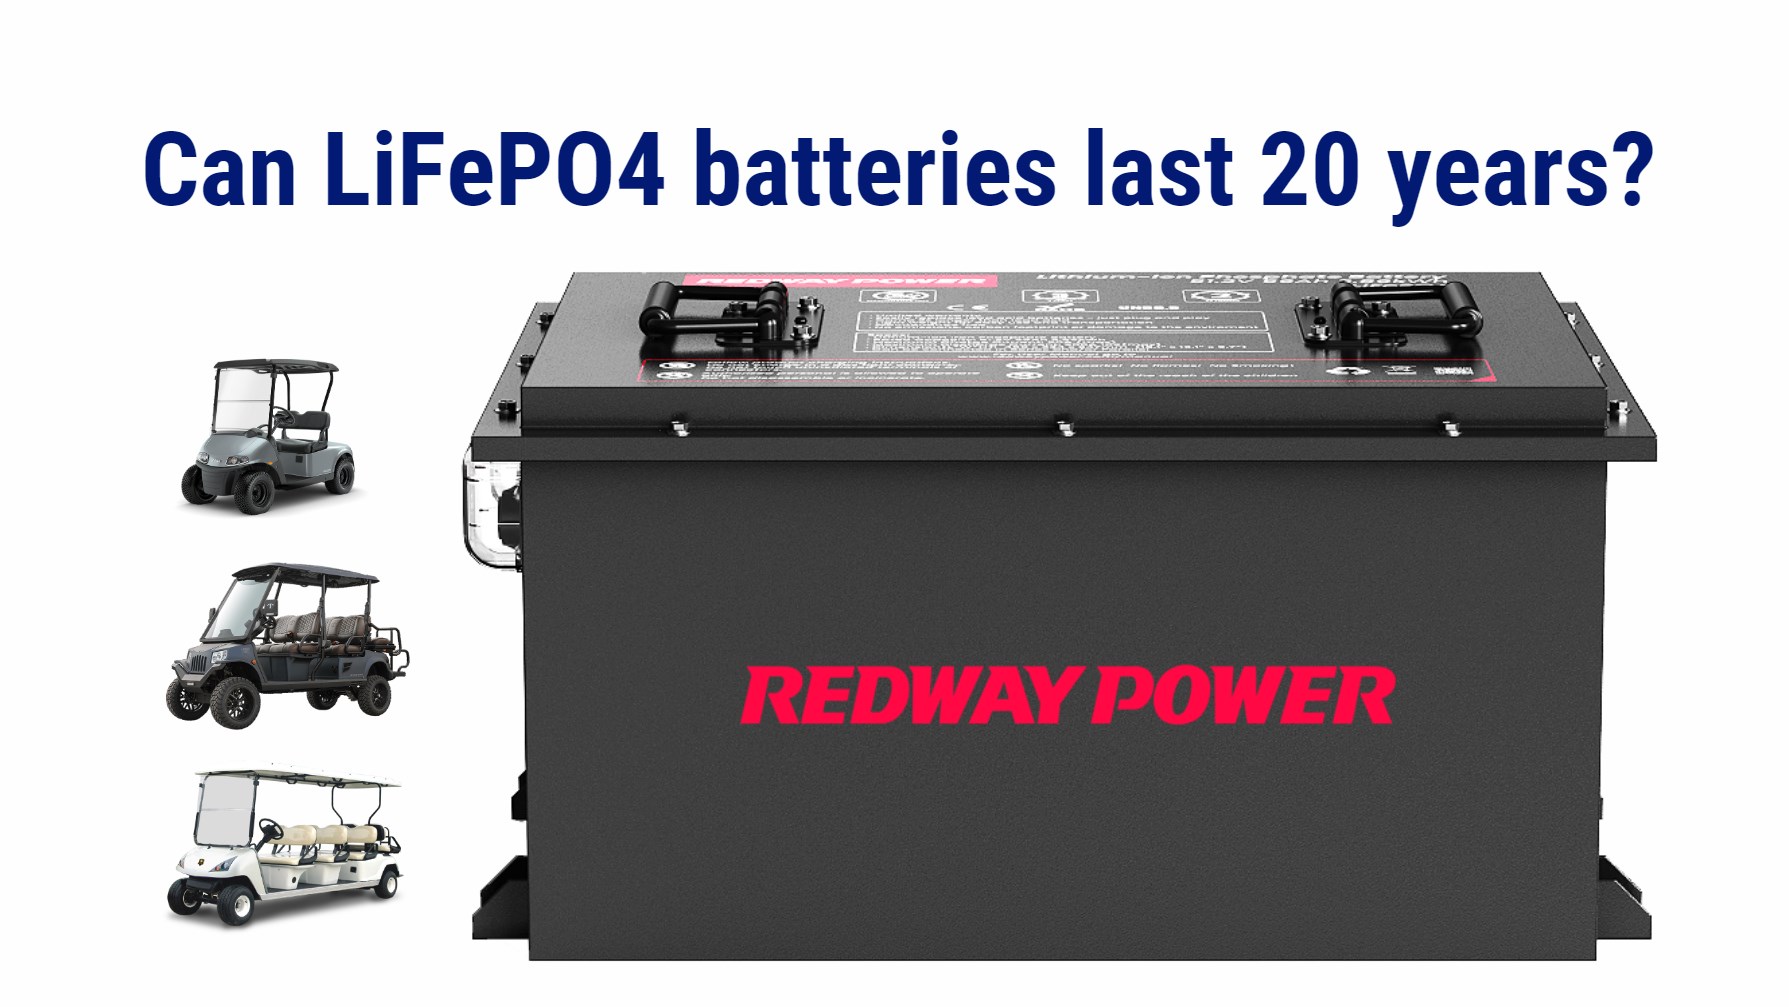 Can LiFePO4 batteries last 20 years?